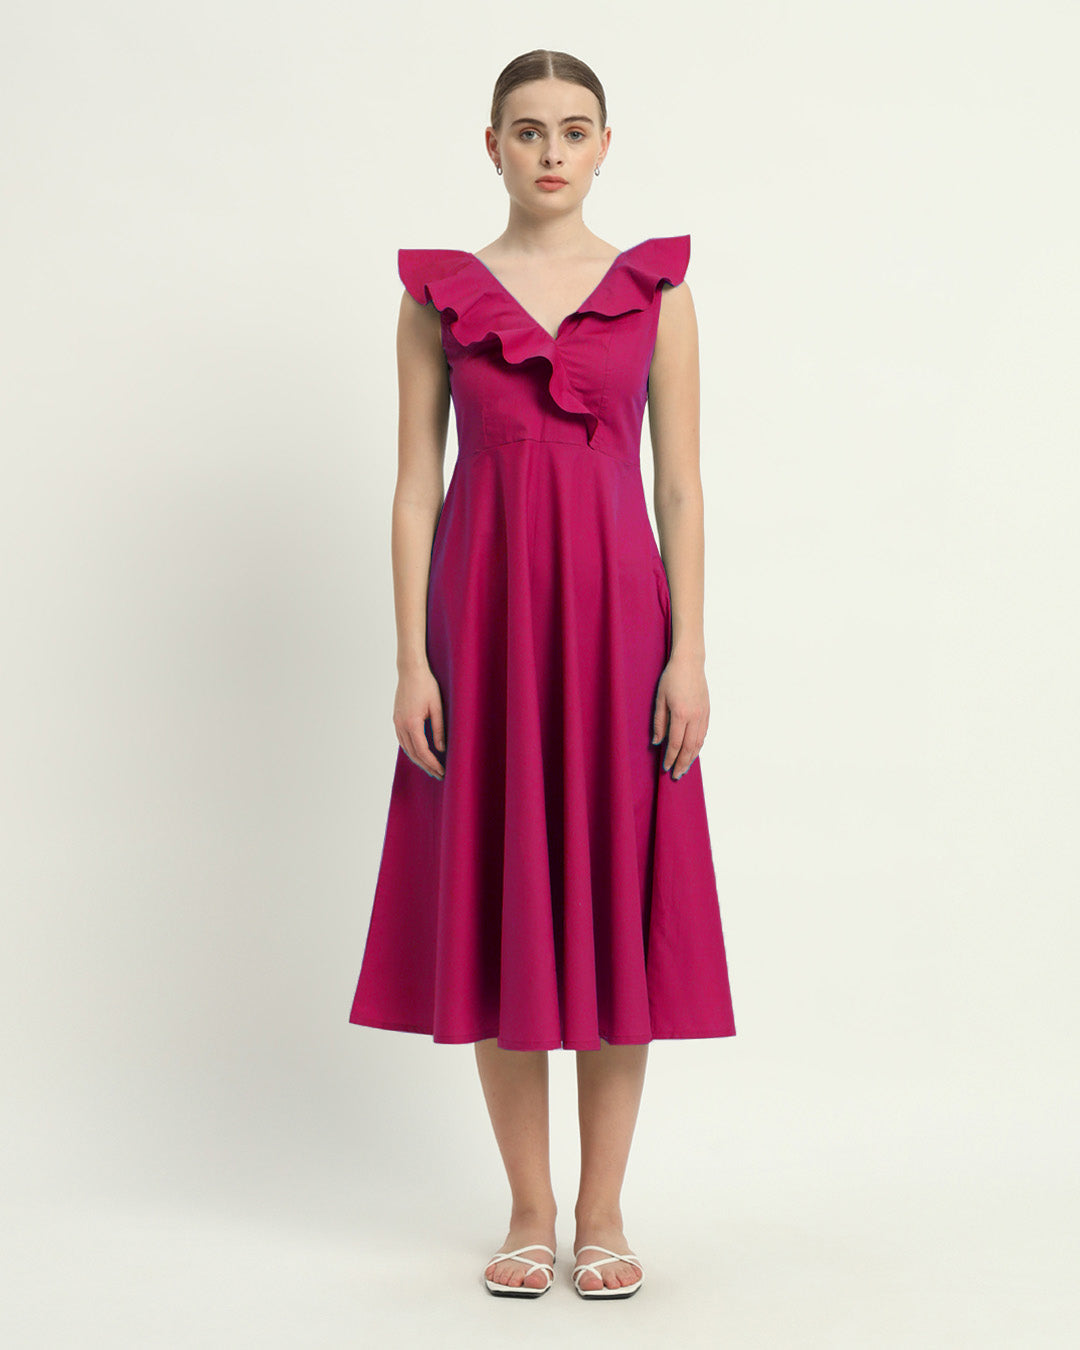 The Albany Berry Cotton Dress